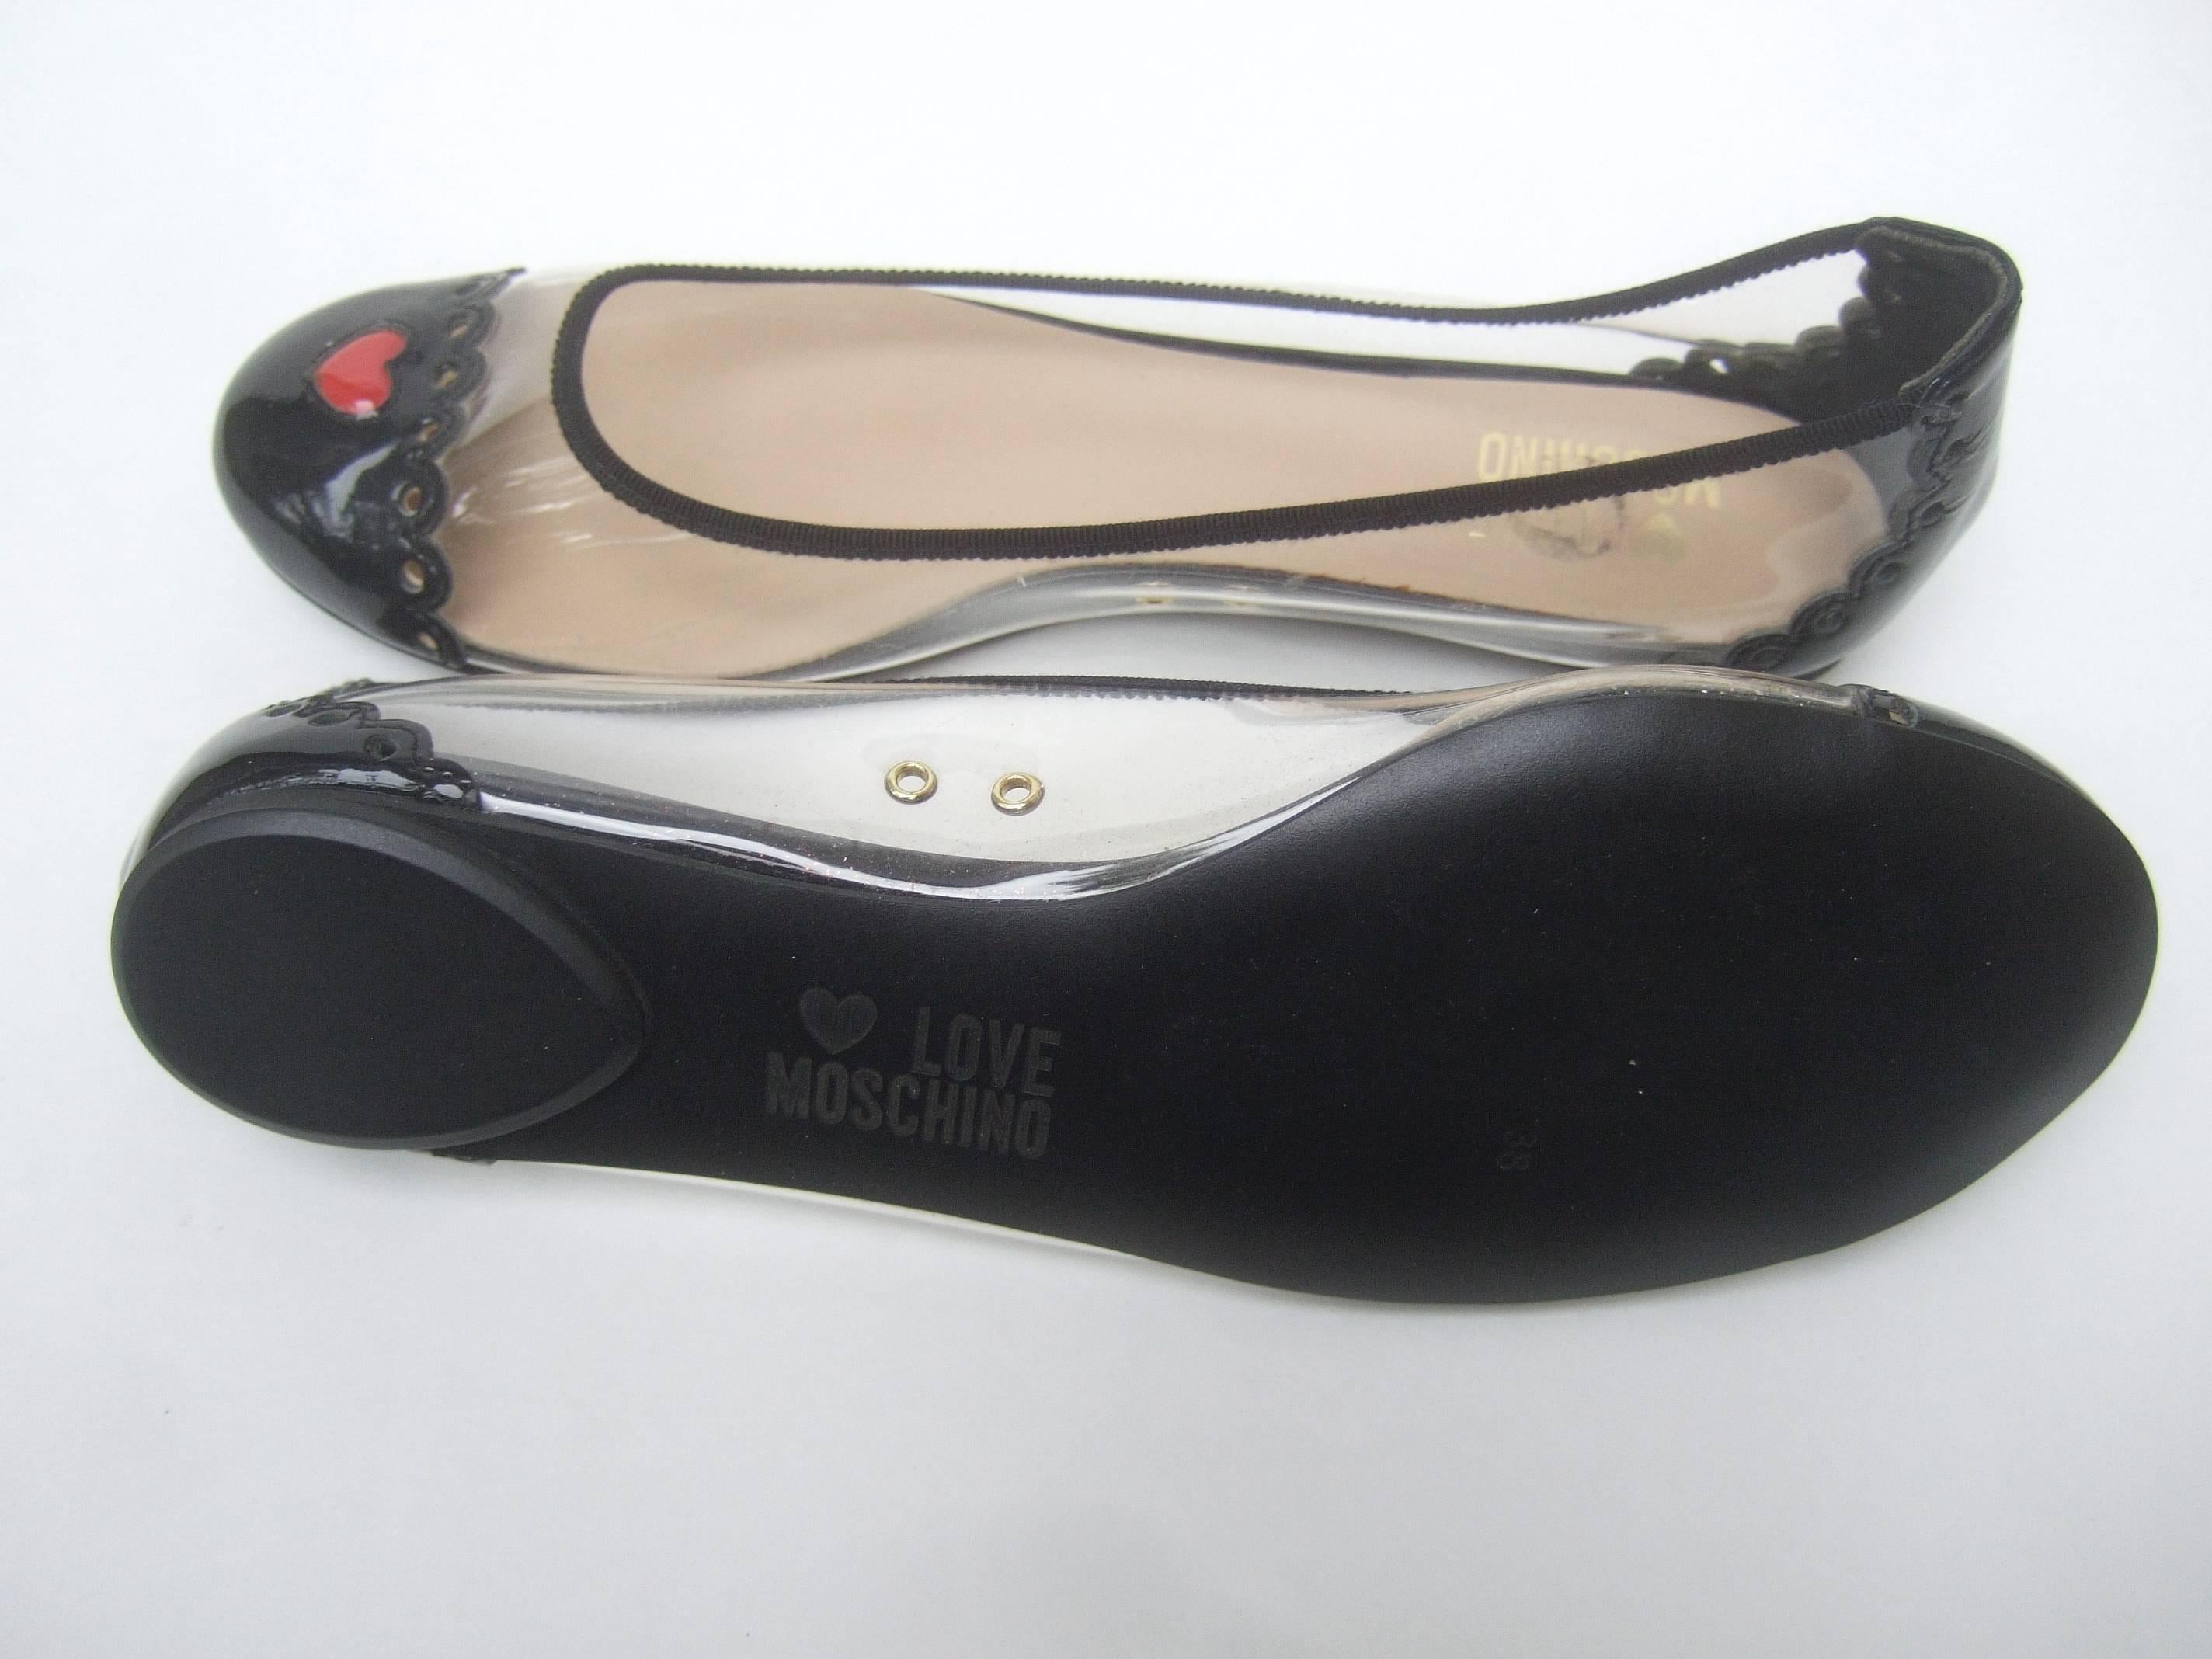 Moschino Cap Toe Ballet Style Flats in Box Size 38 1